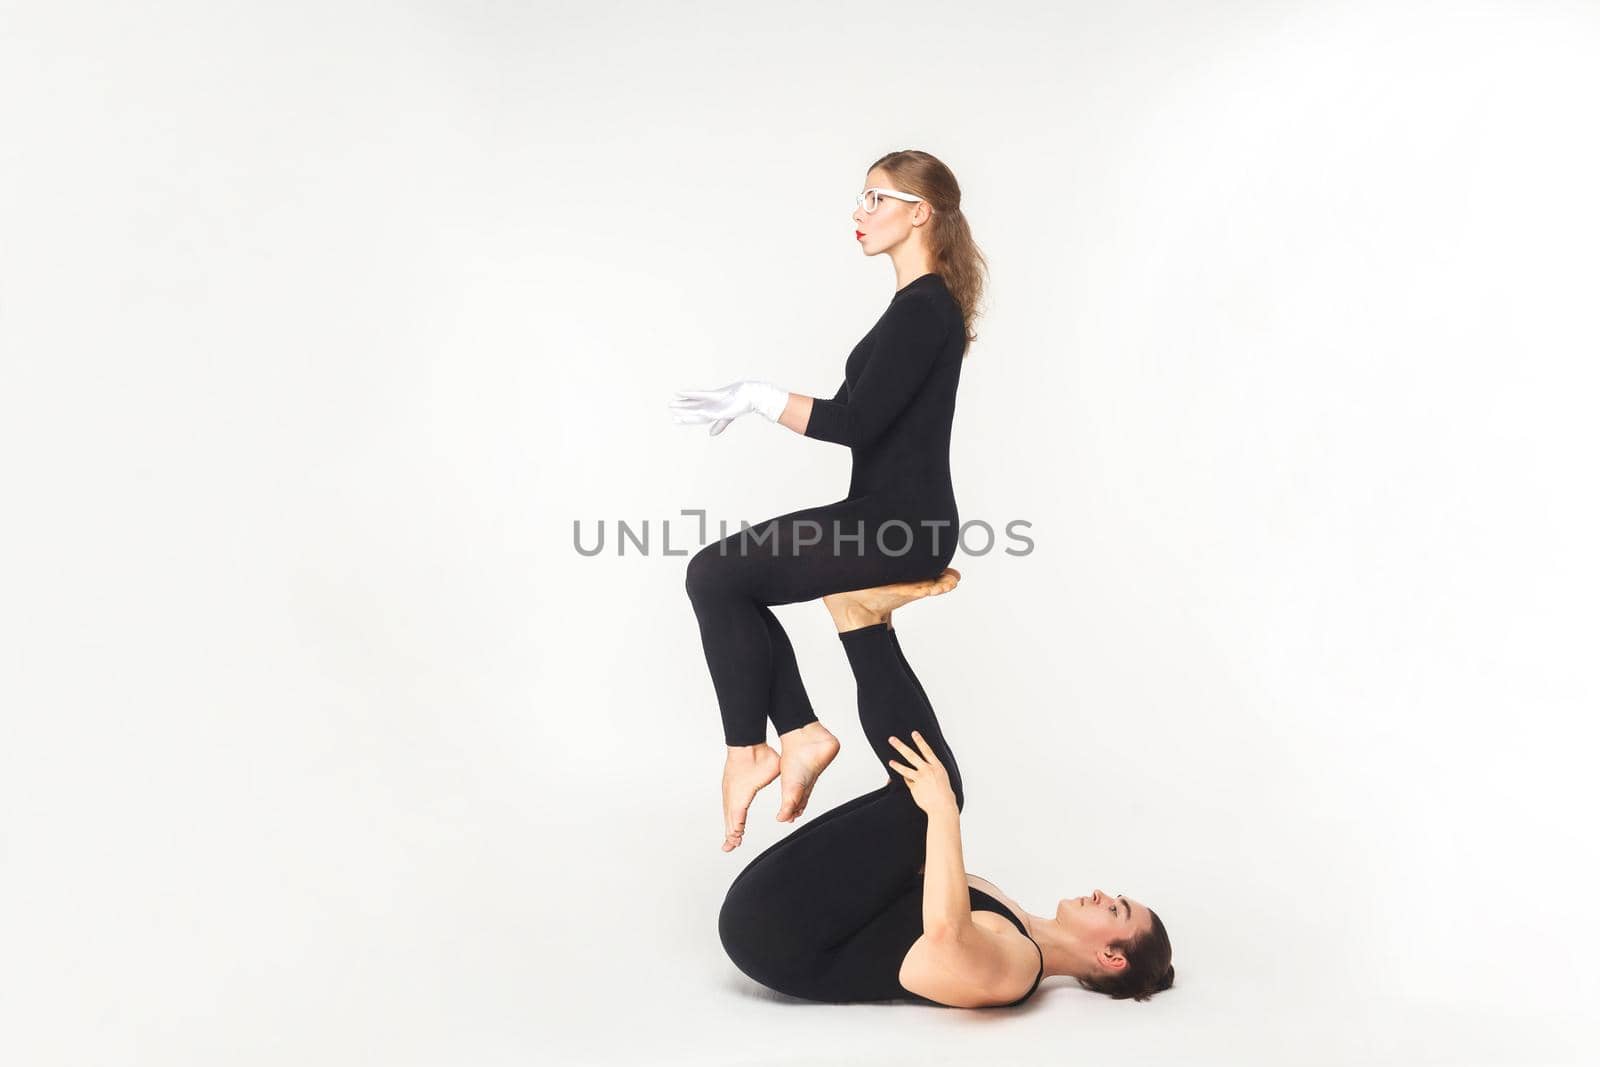 Acrobatic concept, sit pose. Young man holding woman legs, balancing. Studio shot, isolated on white background